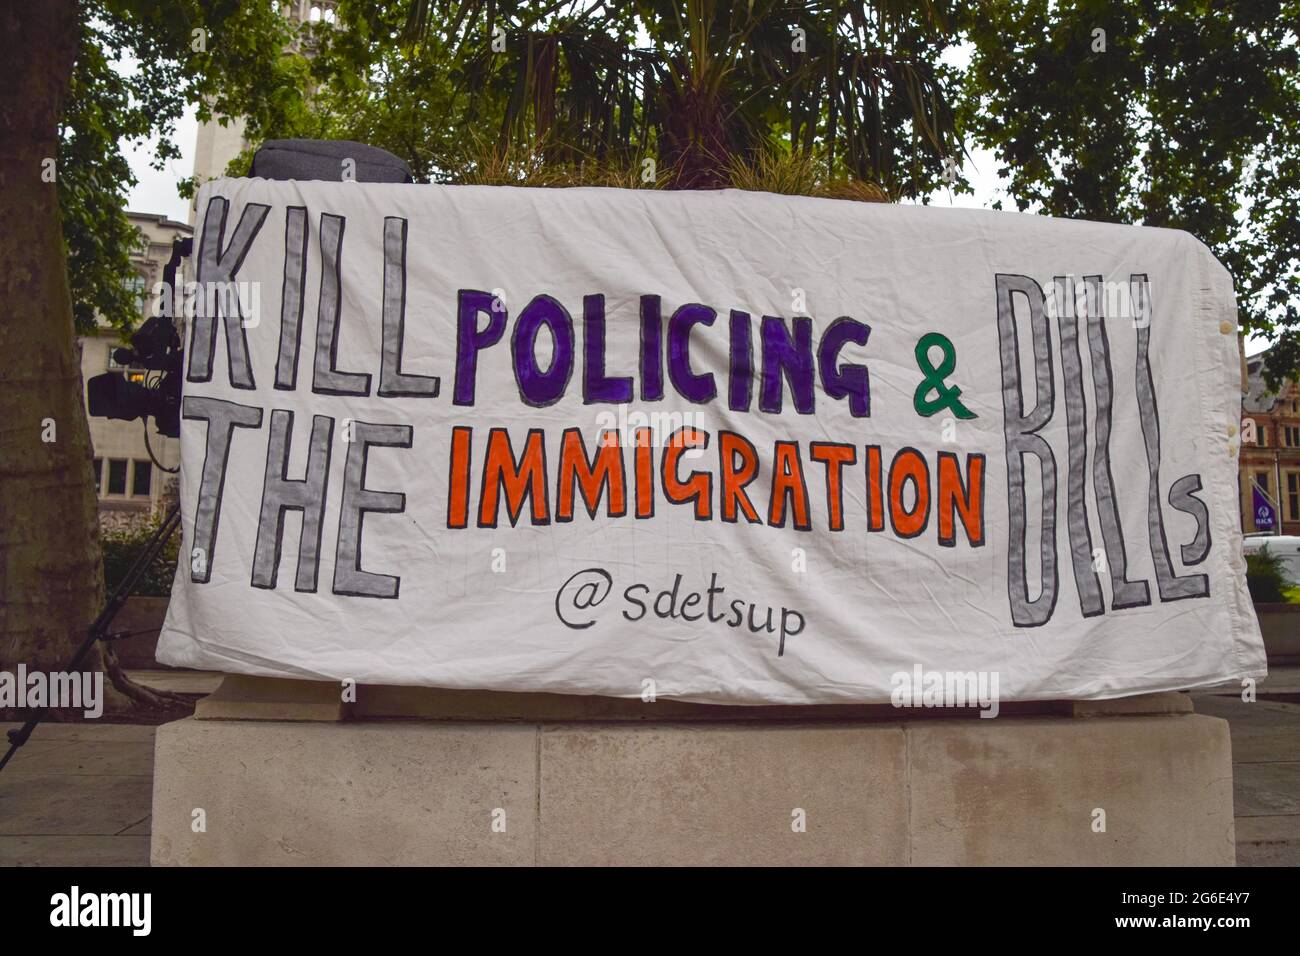 London, United Kingdom. 5th July 2021. Kill The Bill demonstrators gathered in Parliament Square in protest against the Police, Crime, Sentencing and Courts Bill, which many say would give police more powers over protests in the UK. Stock Photo